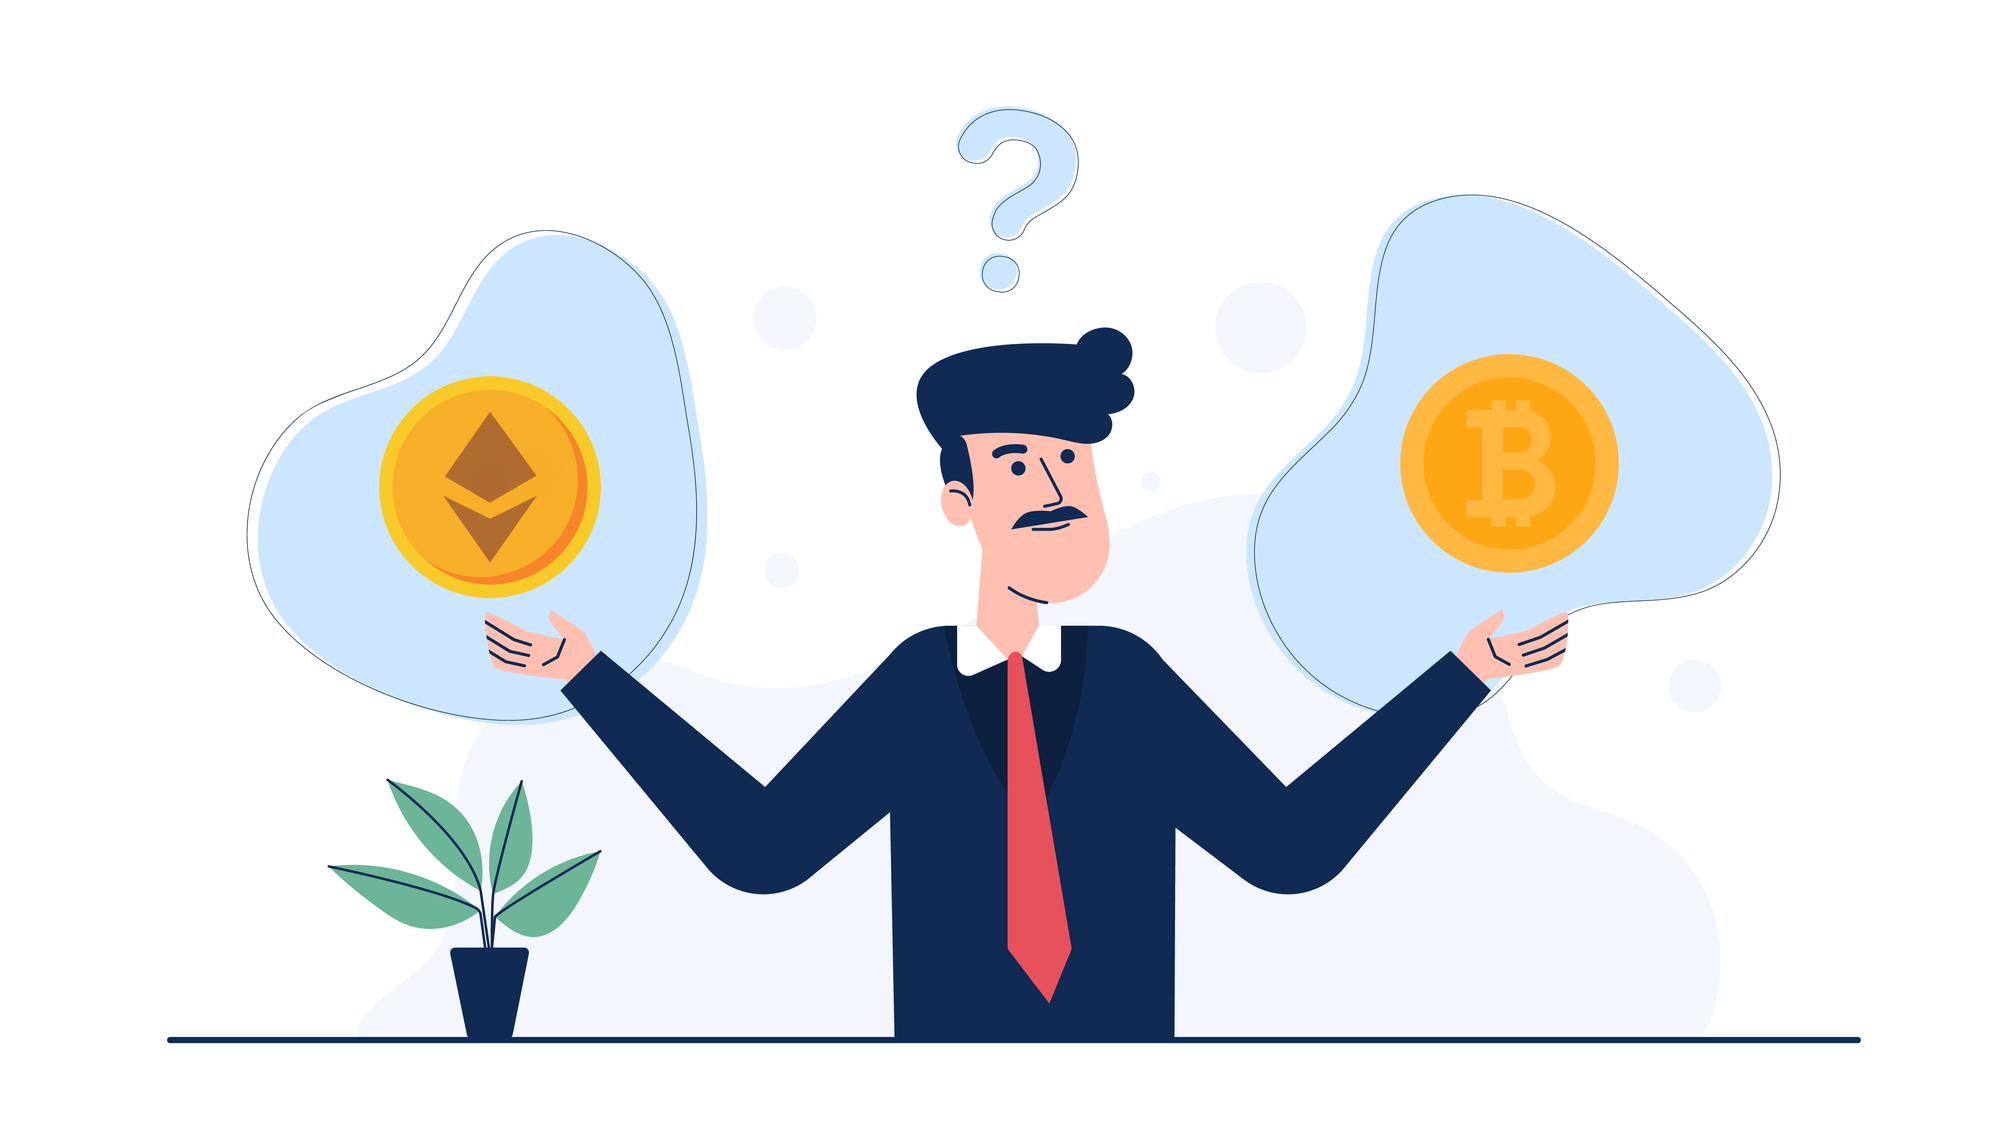 Bitcoin or Ethereum: Which is a Better Payment Option For Merchants?